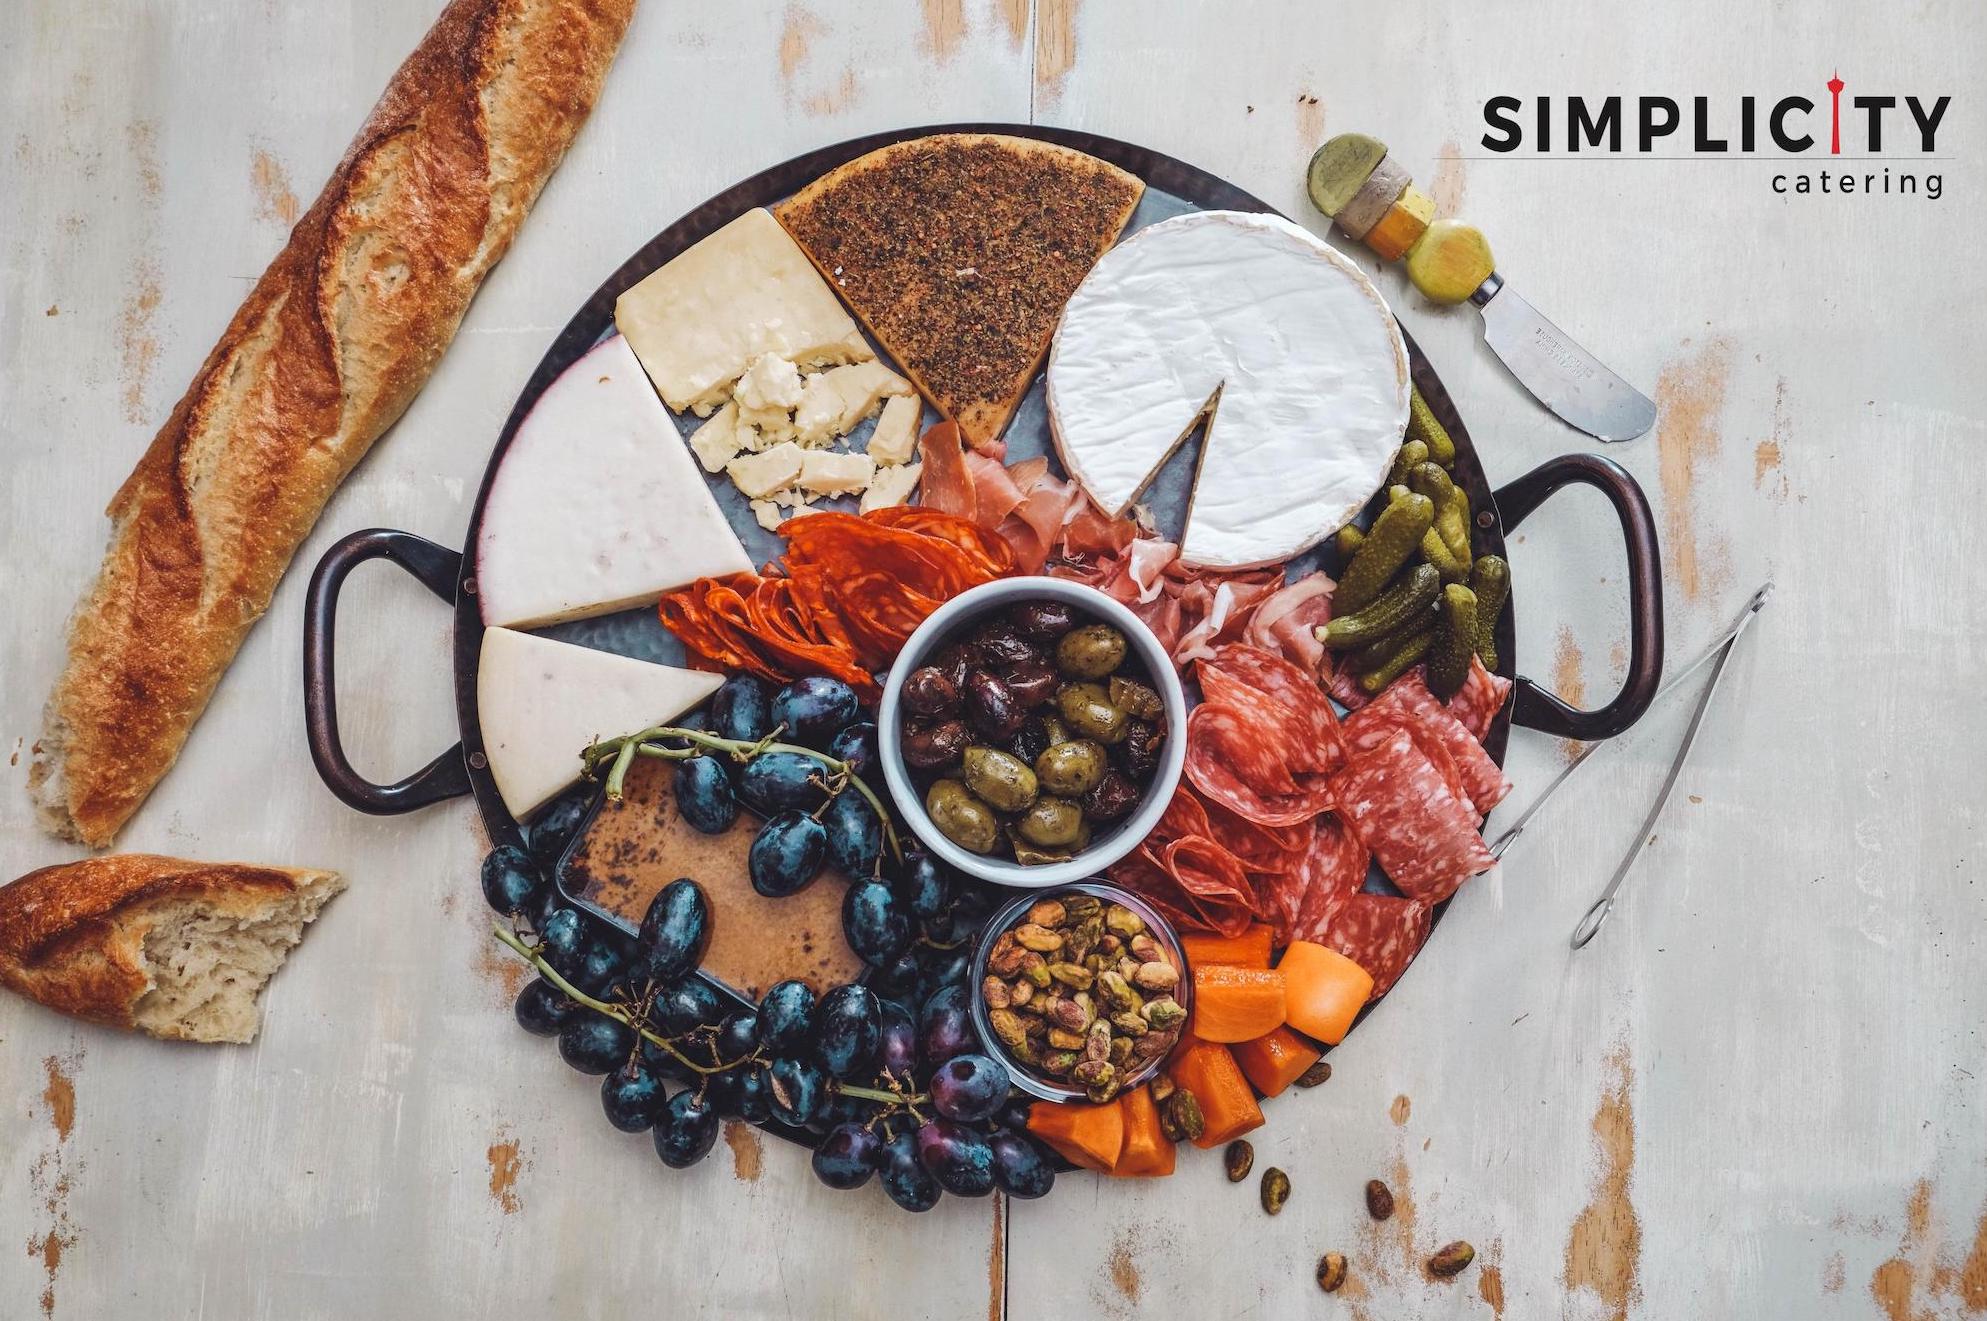 Simplicity Catering - Homepage